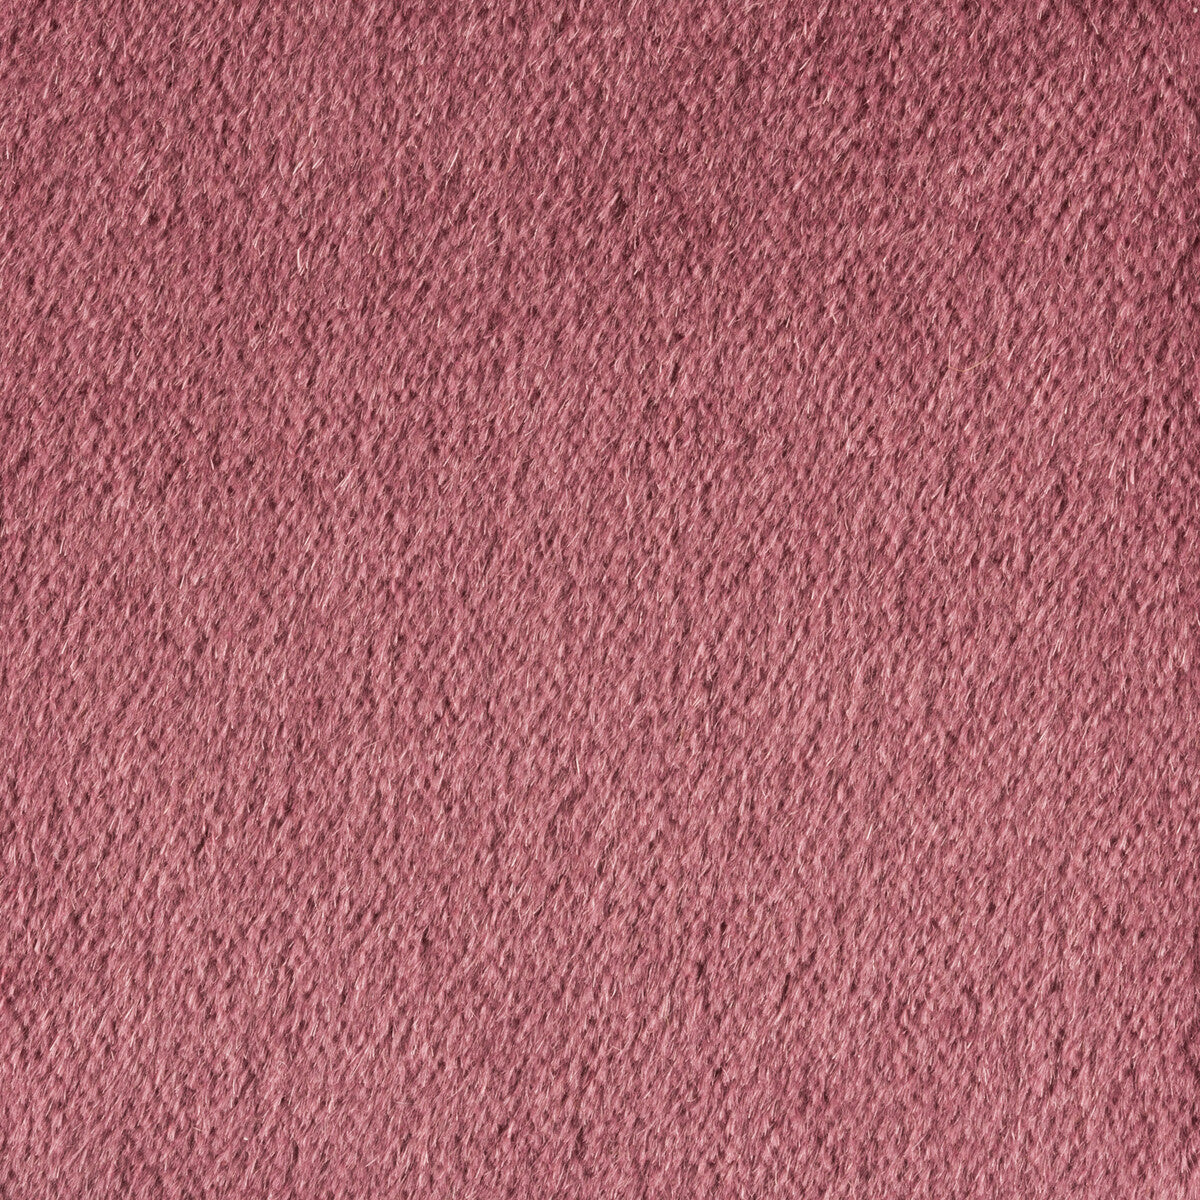 Autun Mohair Velvet fabric in mauve color - pattern BR-89778.739.0 - by Brunschwig &amp; Fils